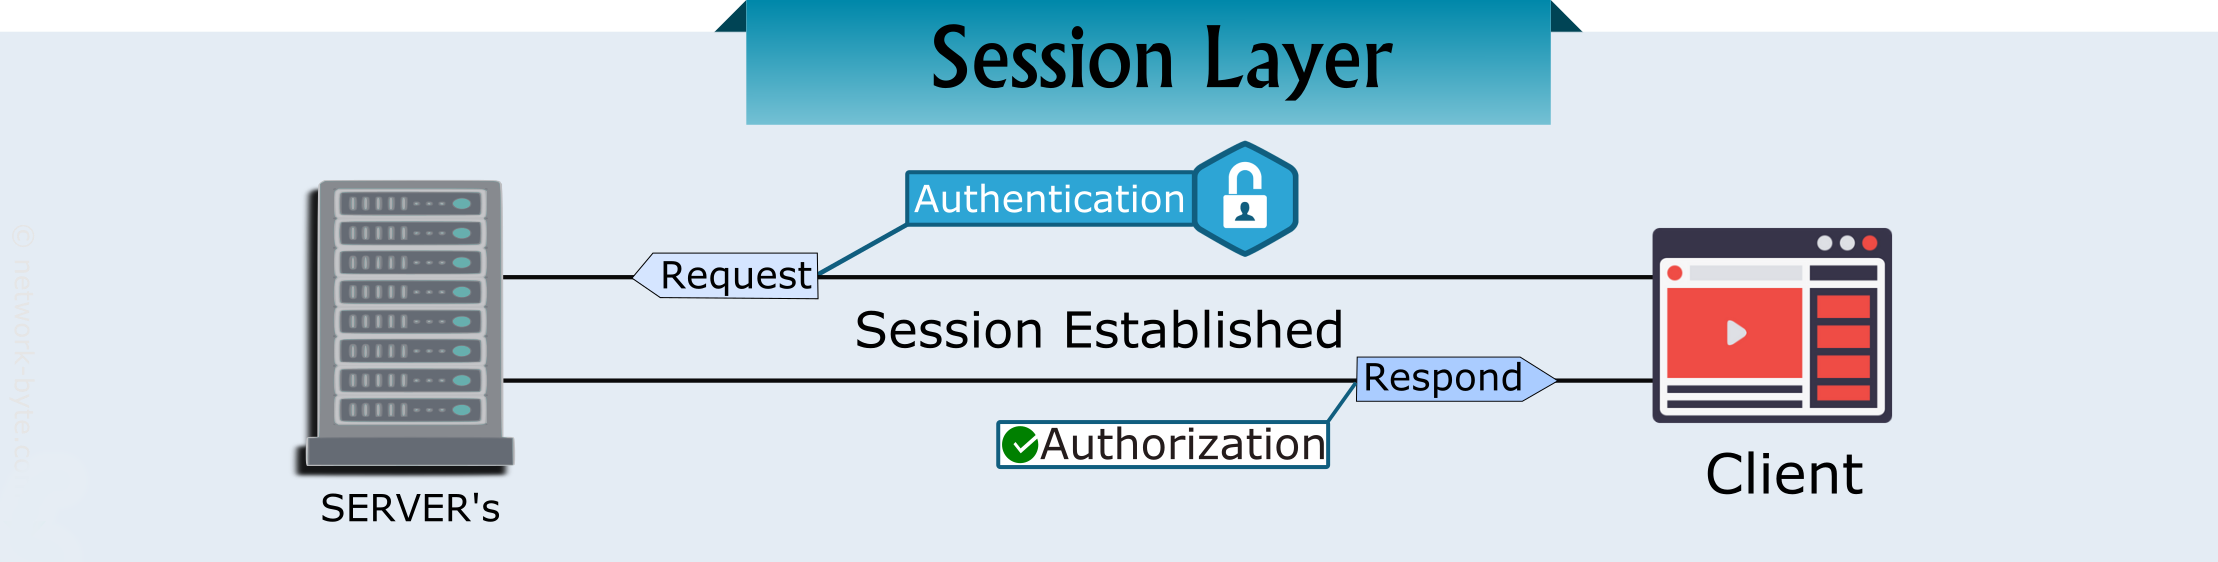 Session layer in OSI model